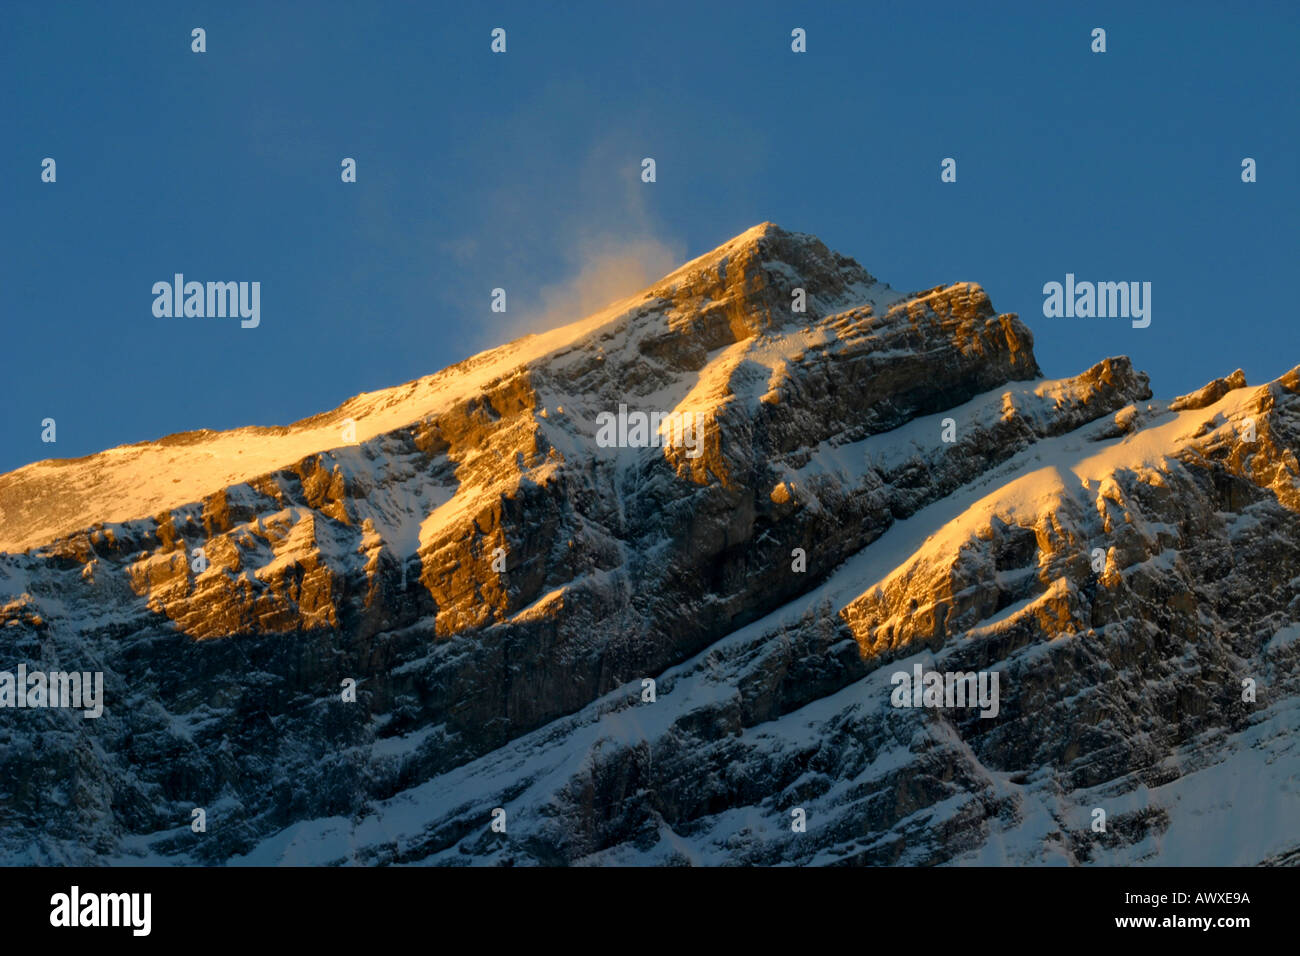 Sunrise in the Canadian Rocky Mountains Stock Photo